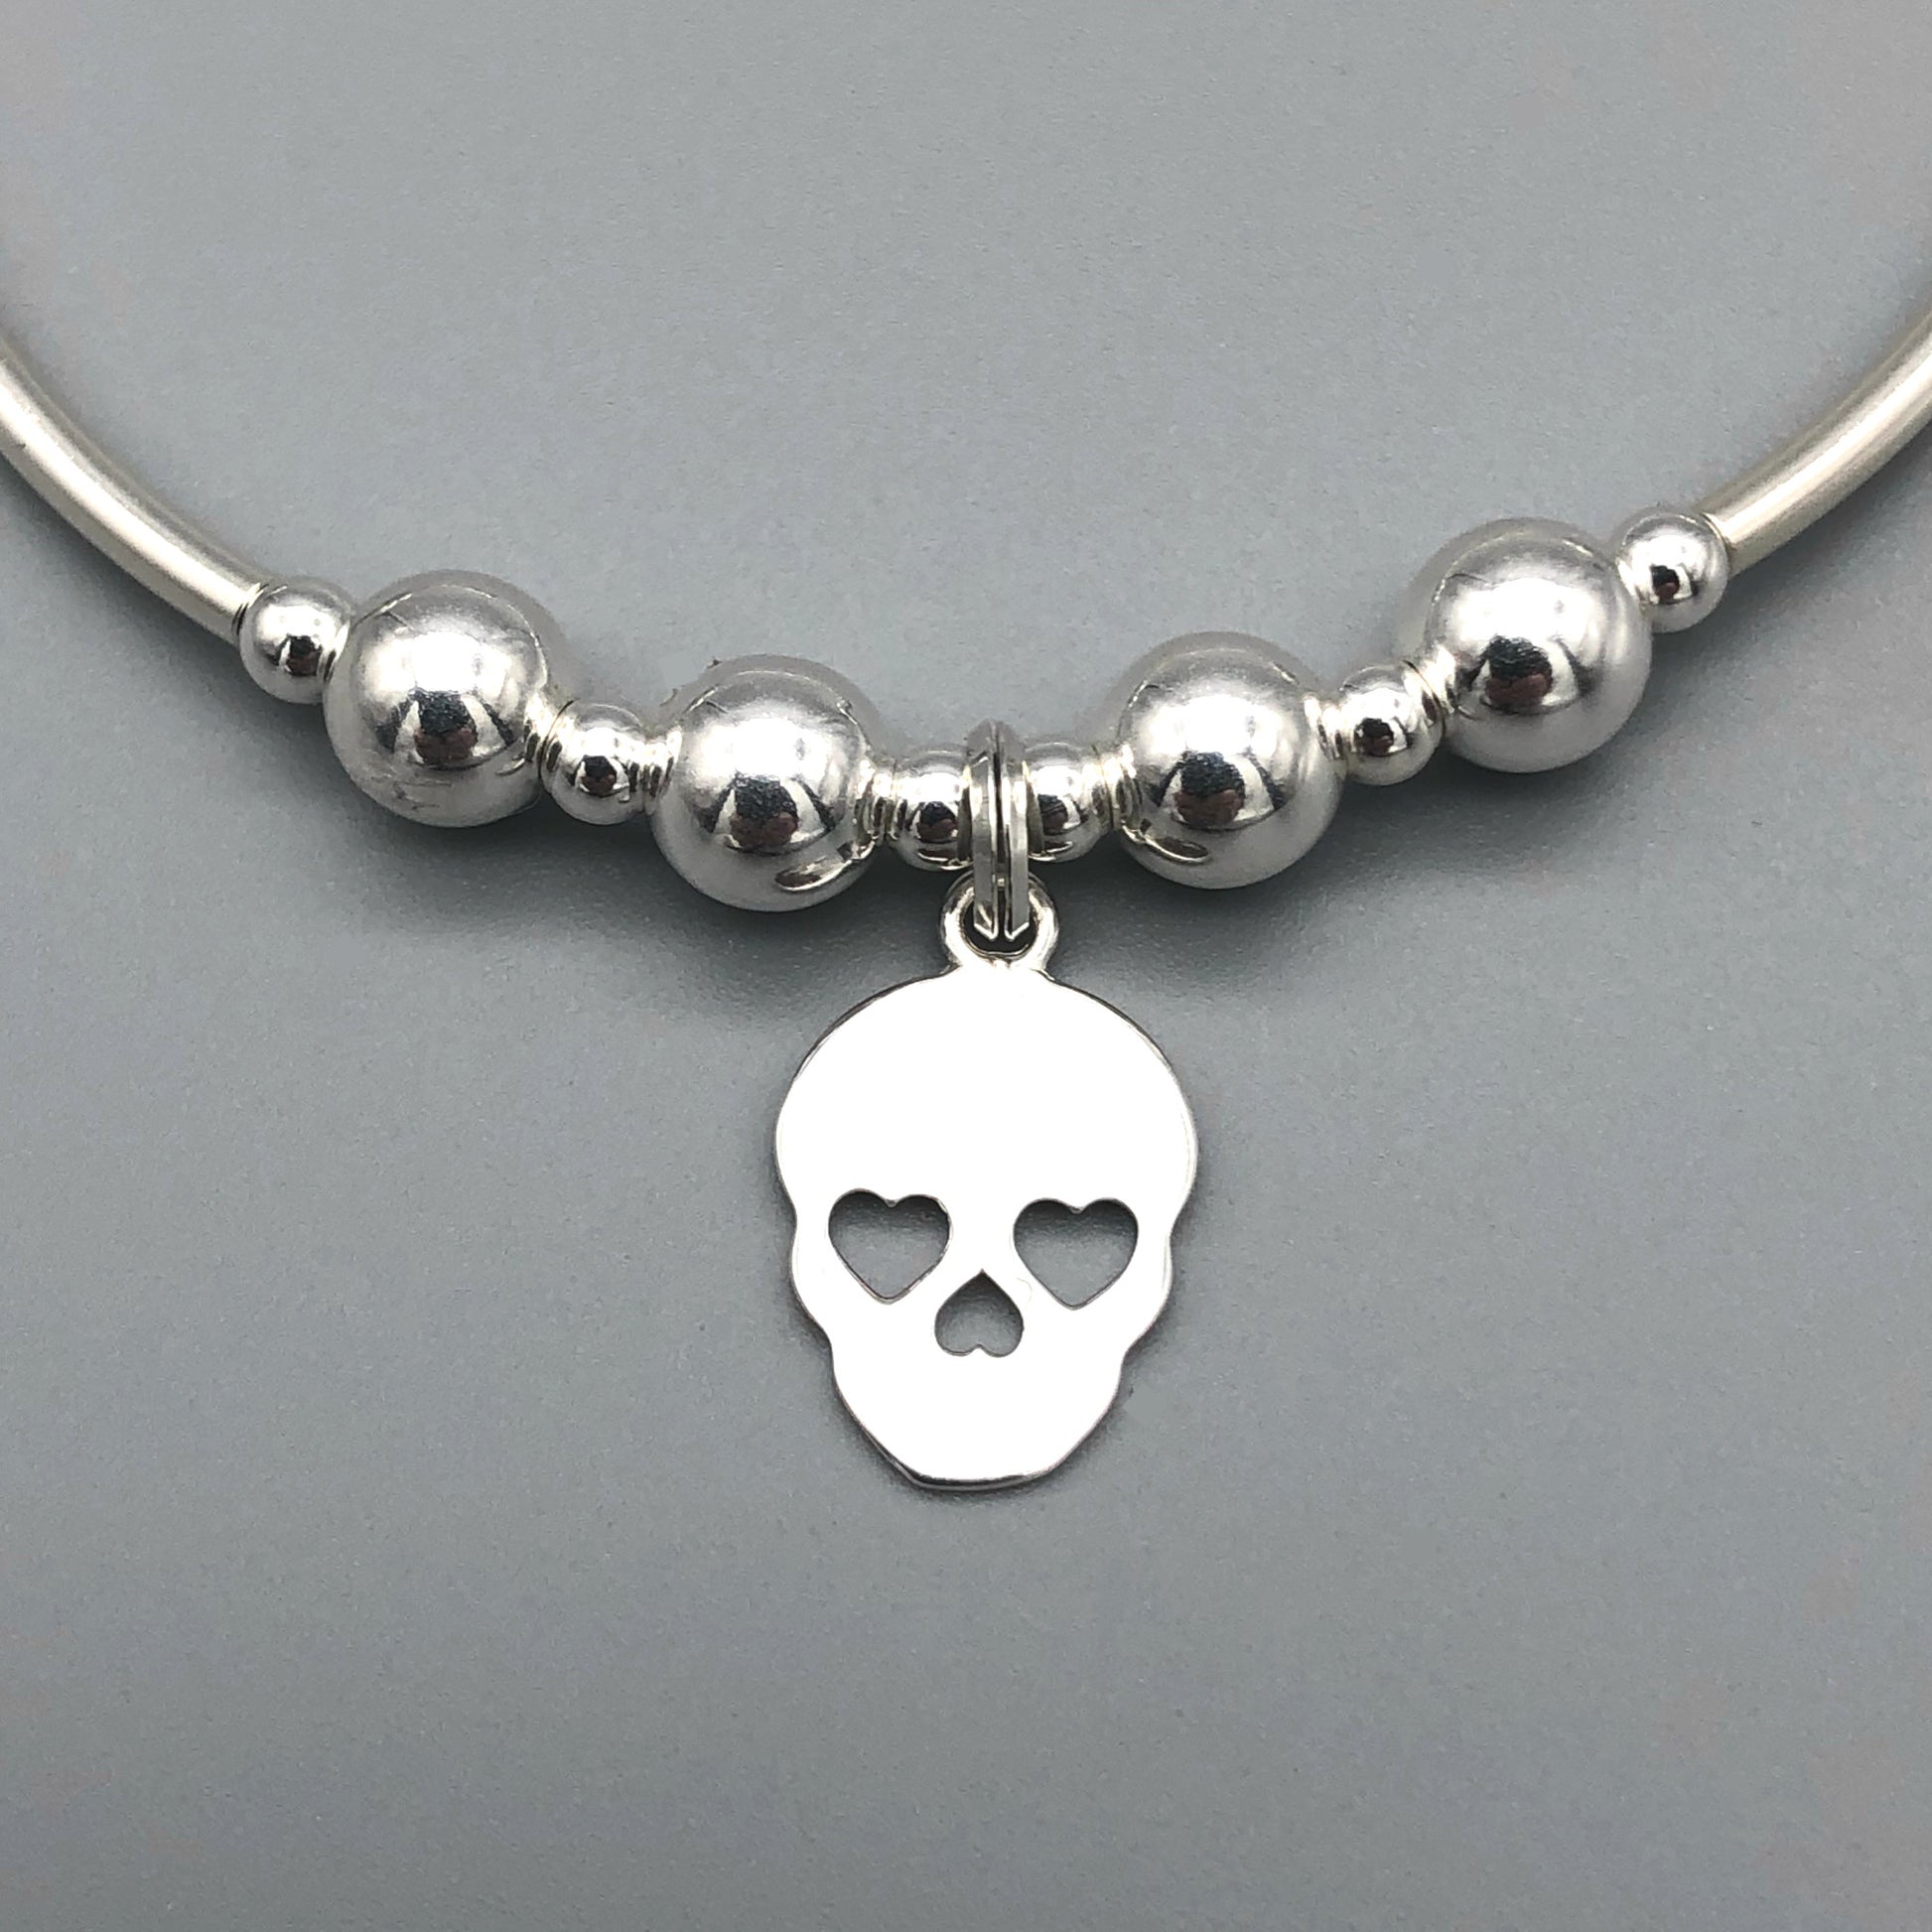 Closeup of Skull charm sterling silver hand-made women's stacking bracelet by My Silver Wish